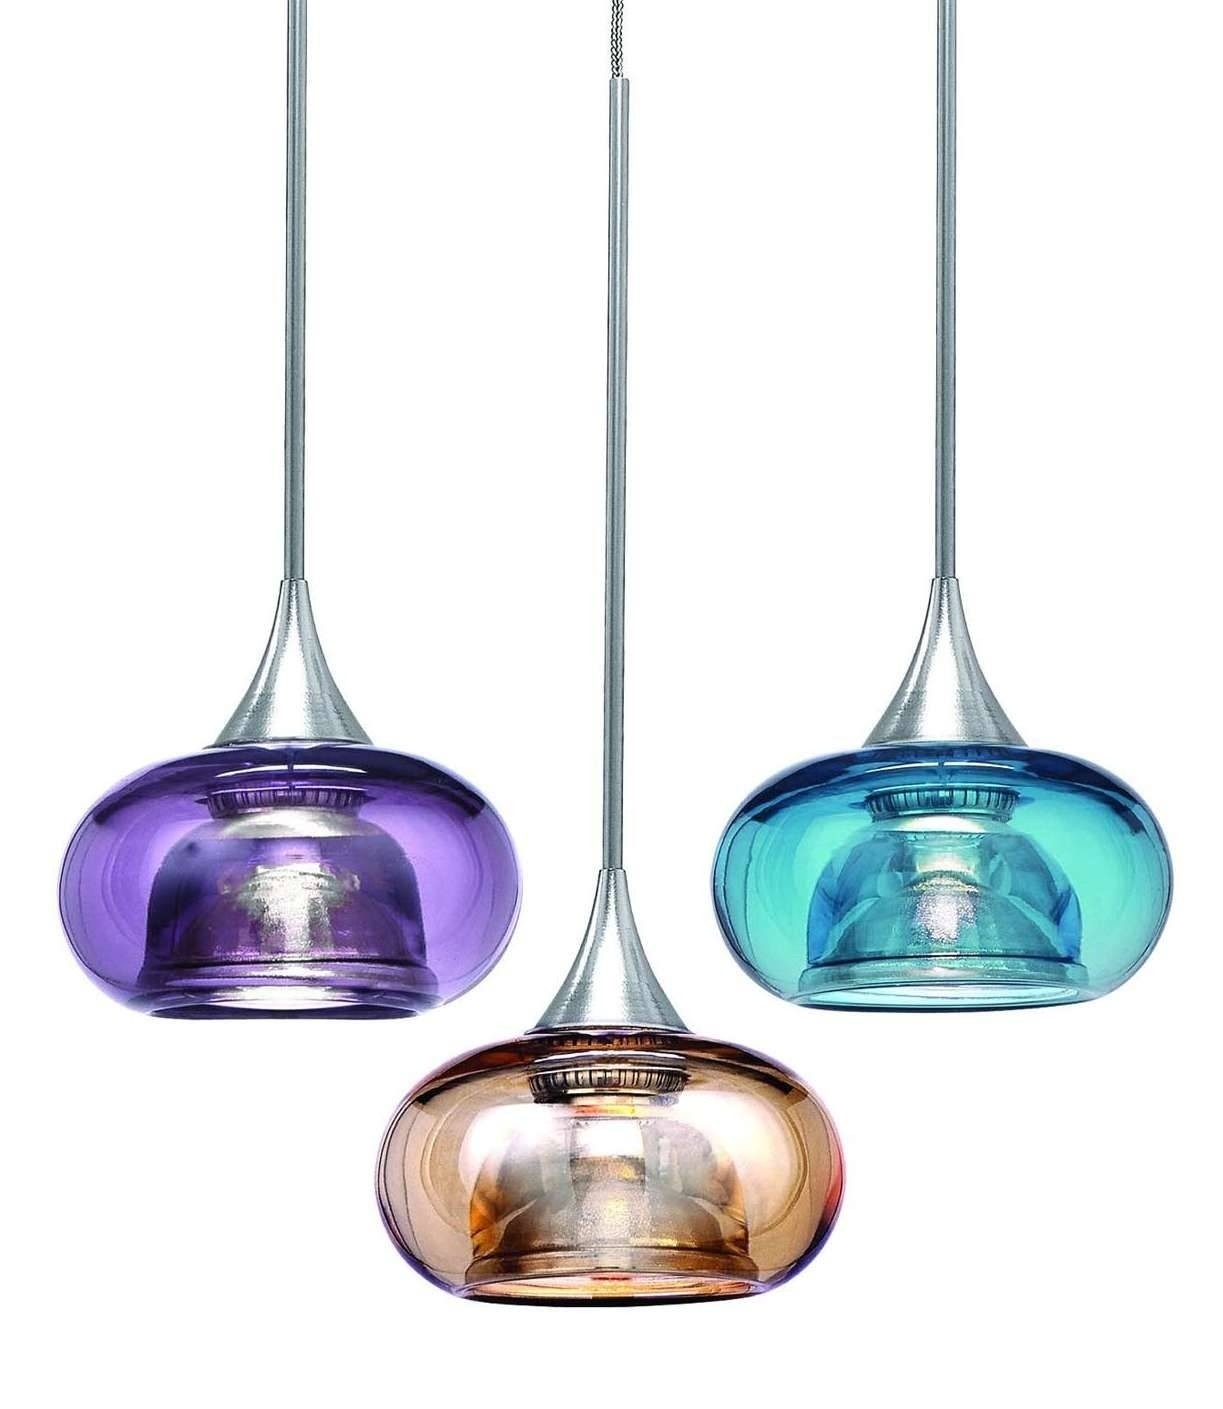 Glass pendant lights suit countertops tabletops and bars